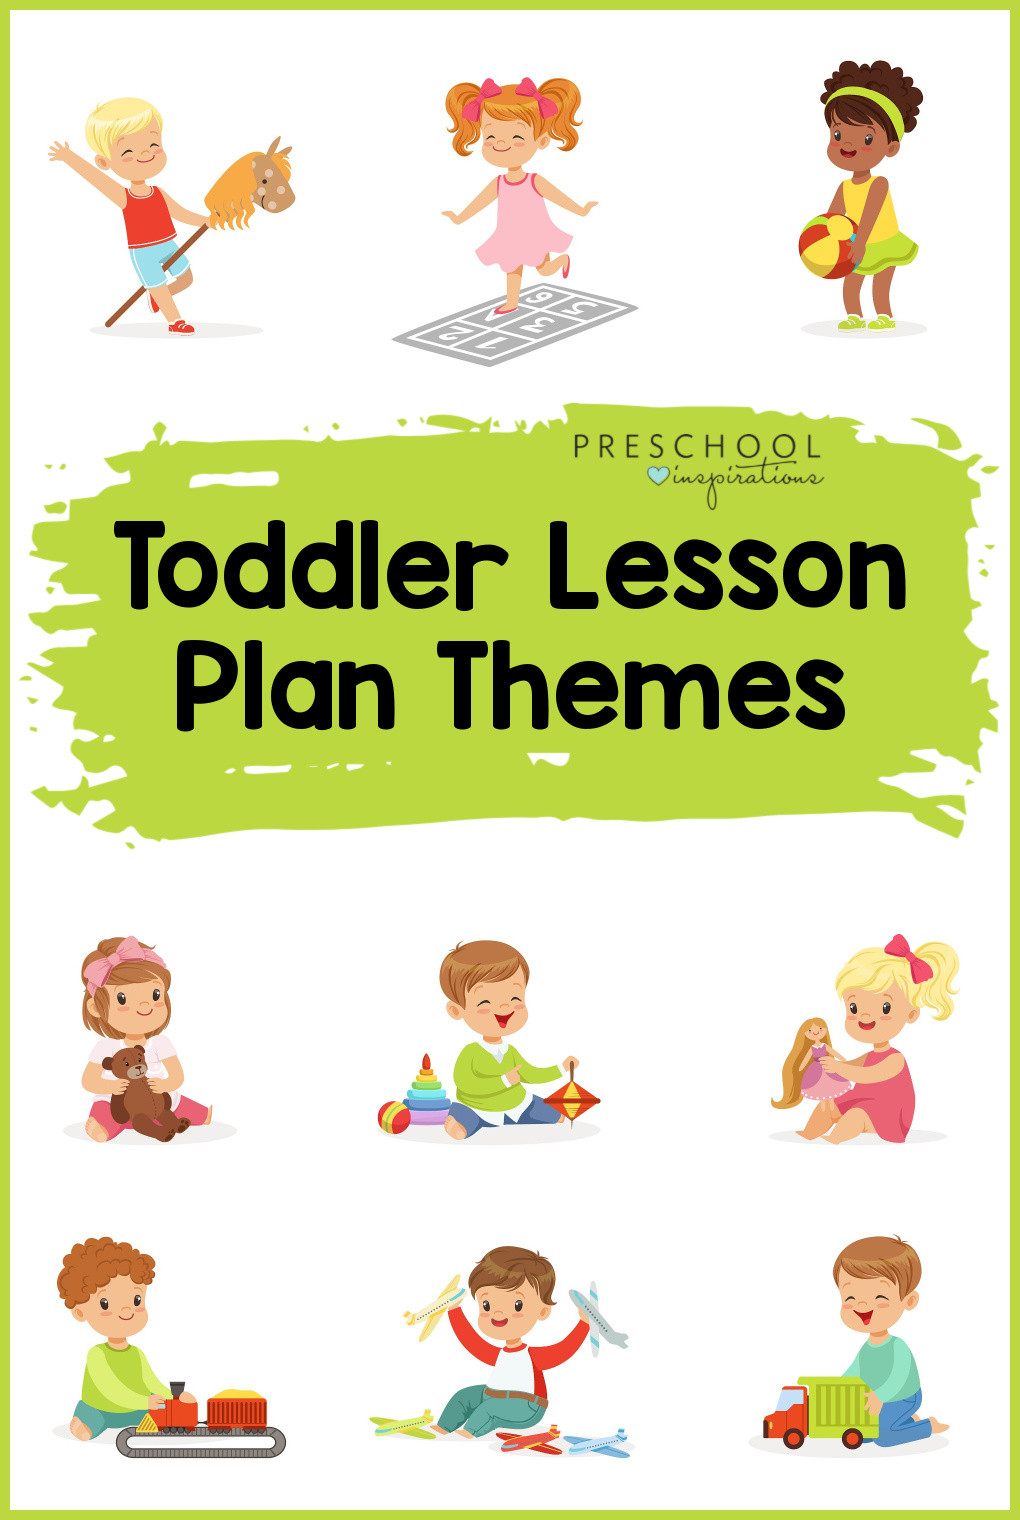 Beach Party Ideas For Preschoolers
 Toddler Lesson Plans and Themes Preschool Inspirations